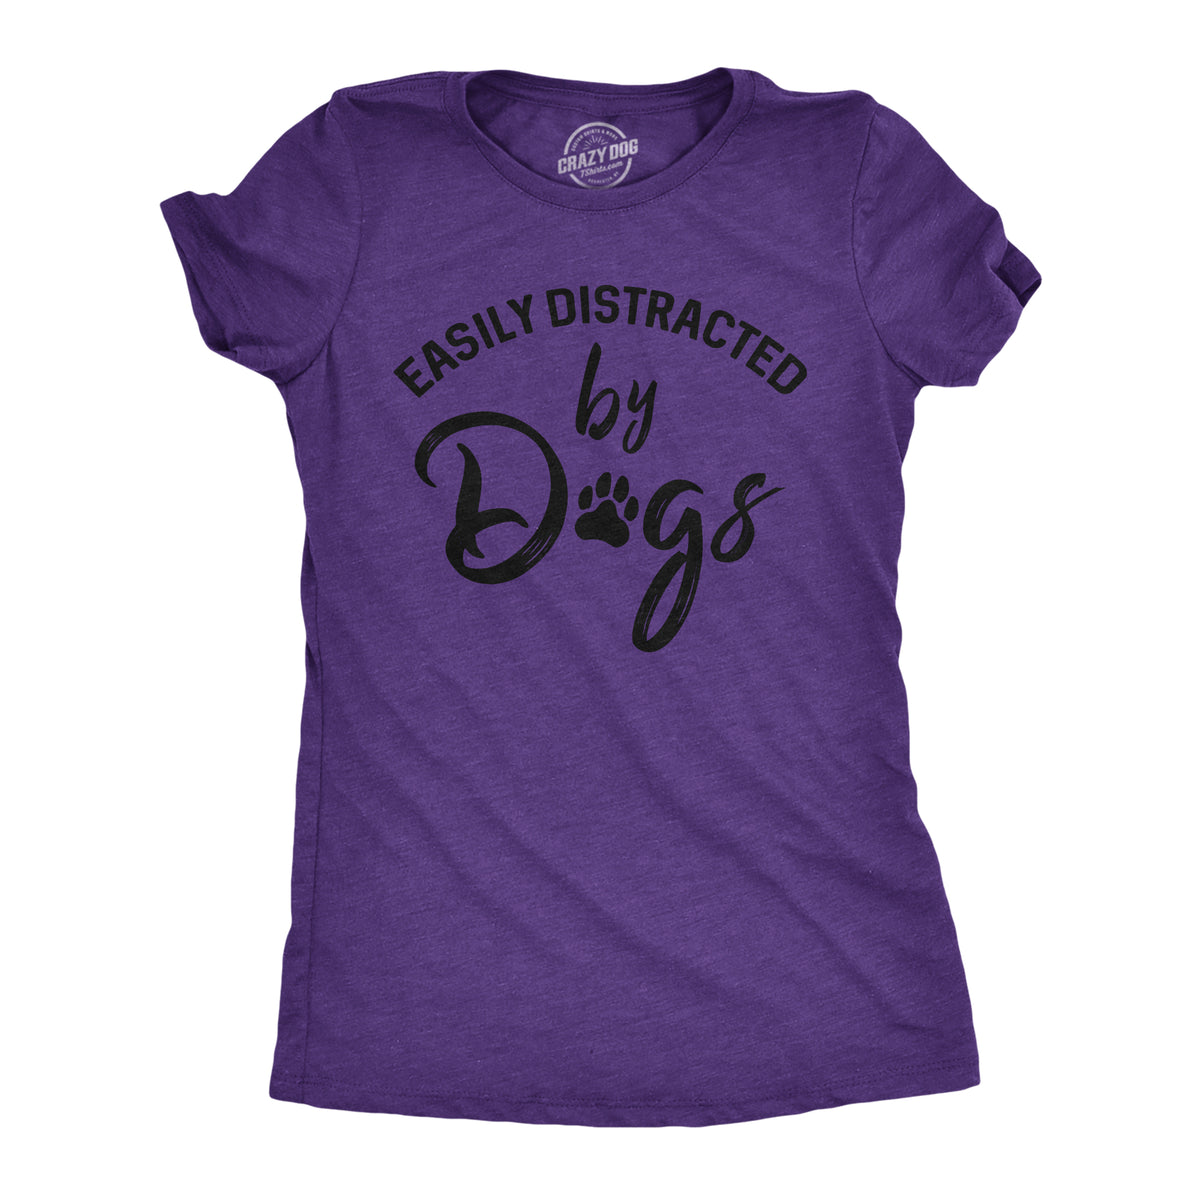 Funny Heather Purple Easily Distracted By Dogs Womens T Shirt Nerdy Dog Tee